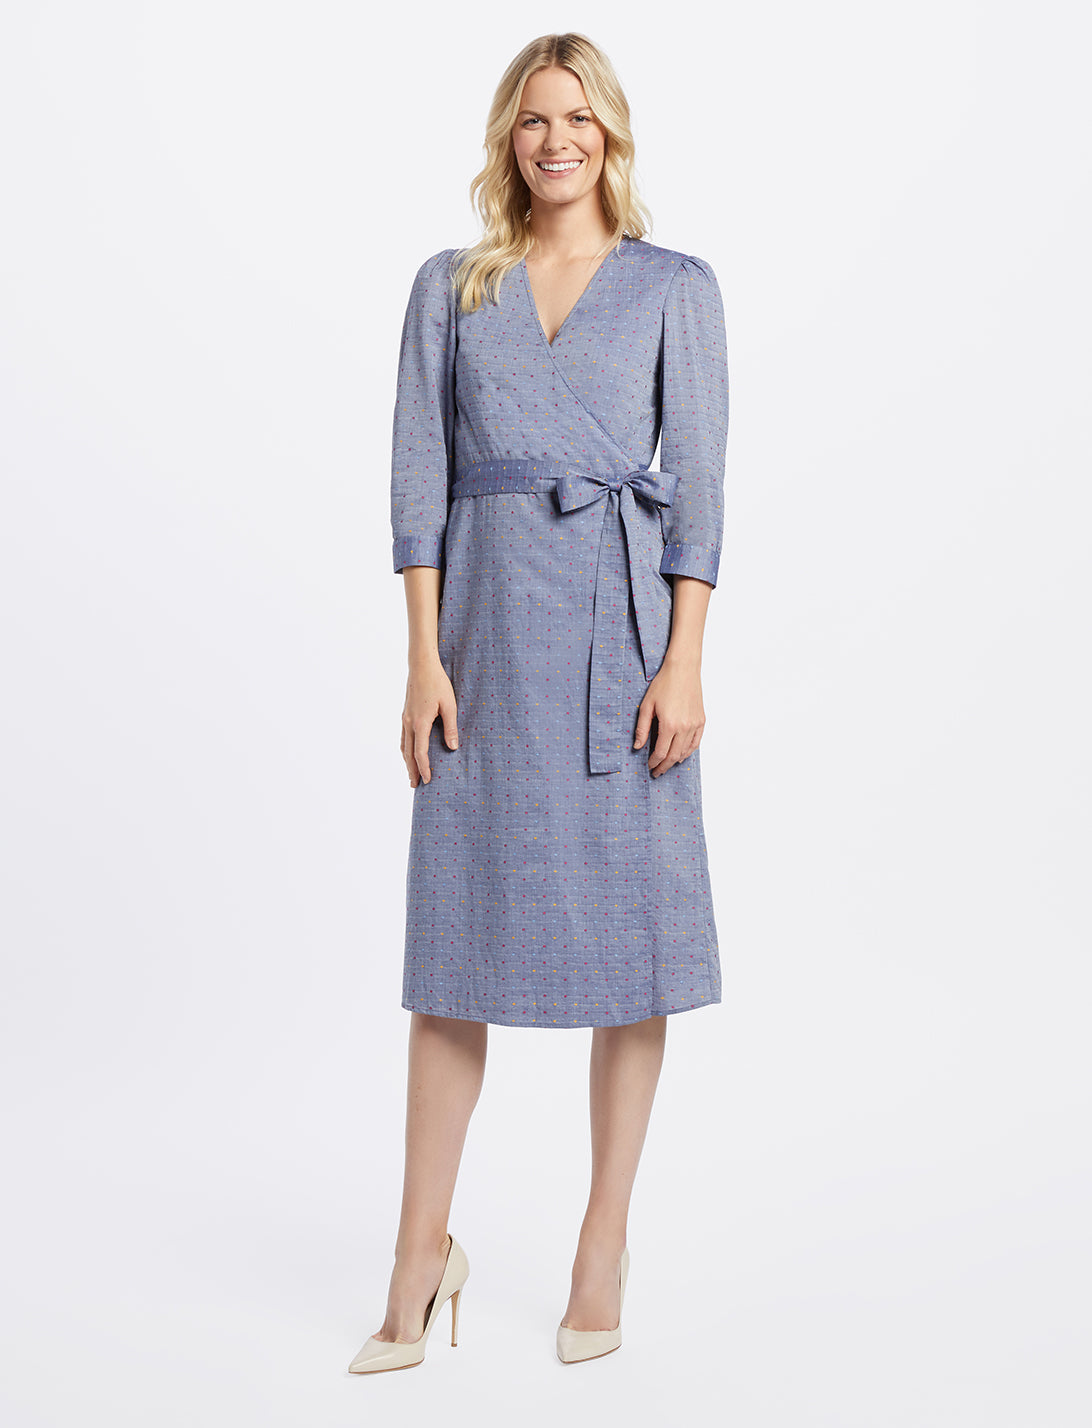 Embroidered Dot Chambray Wrap Dress